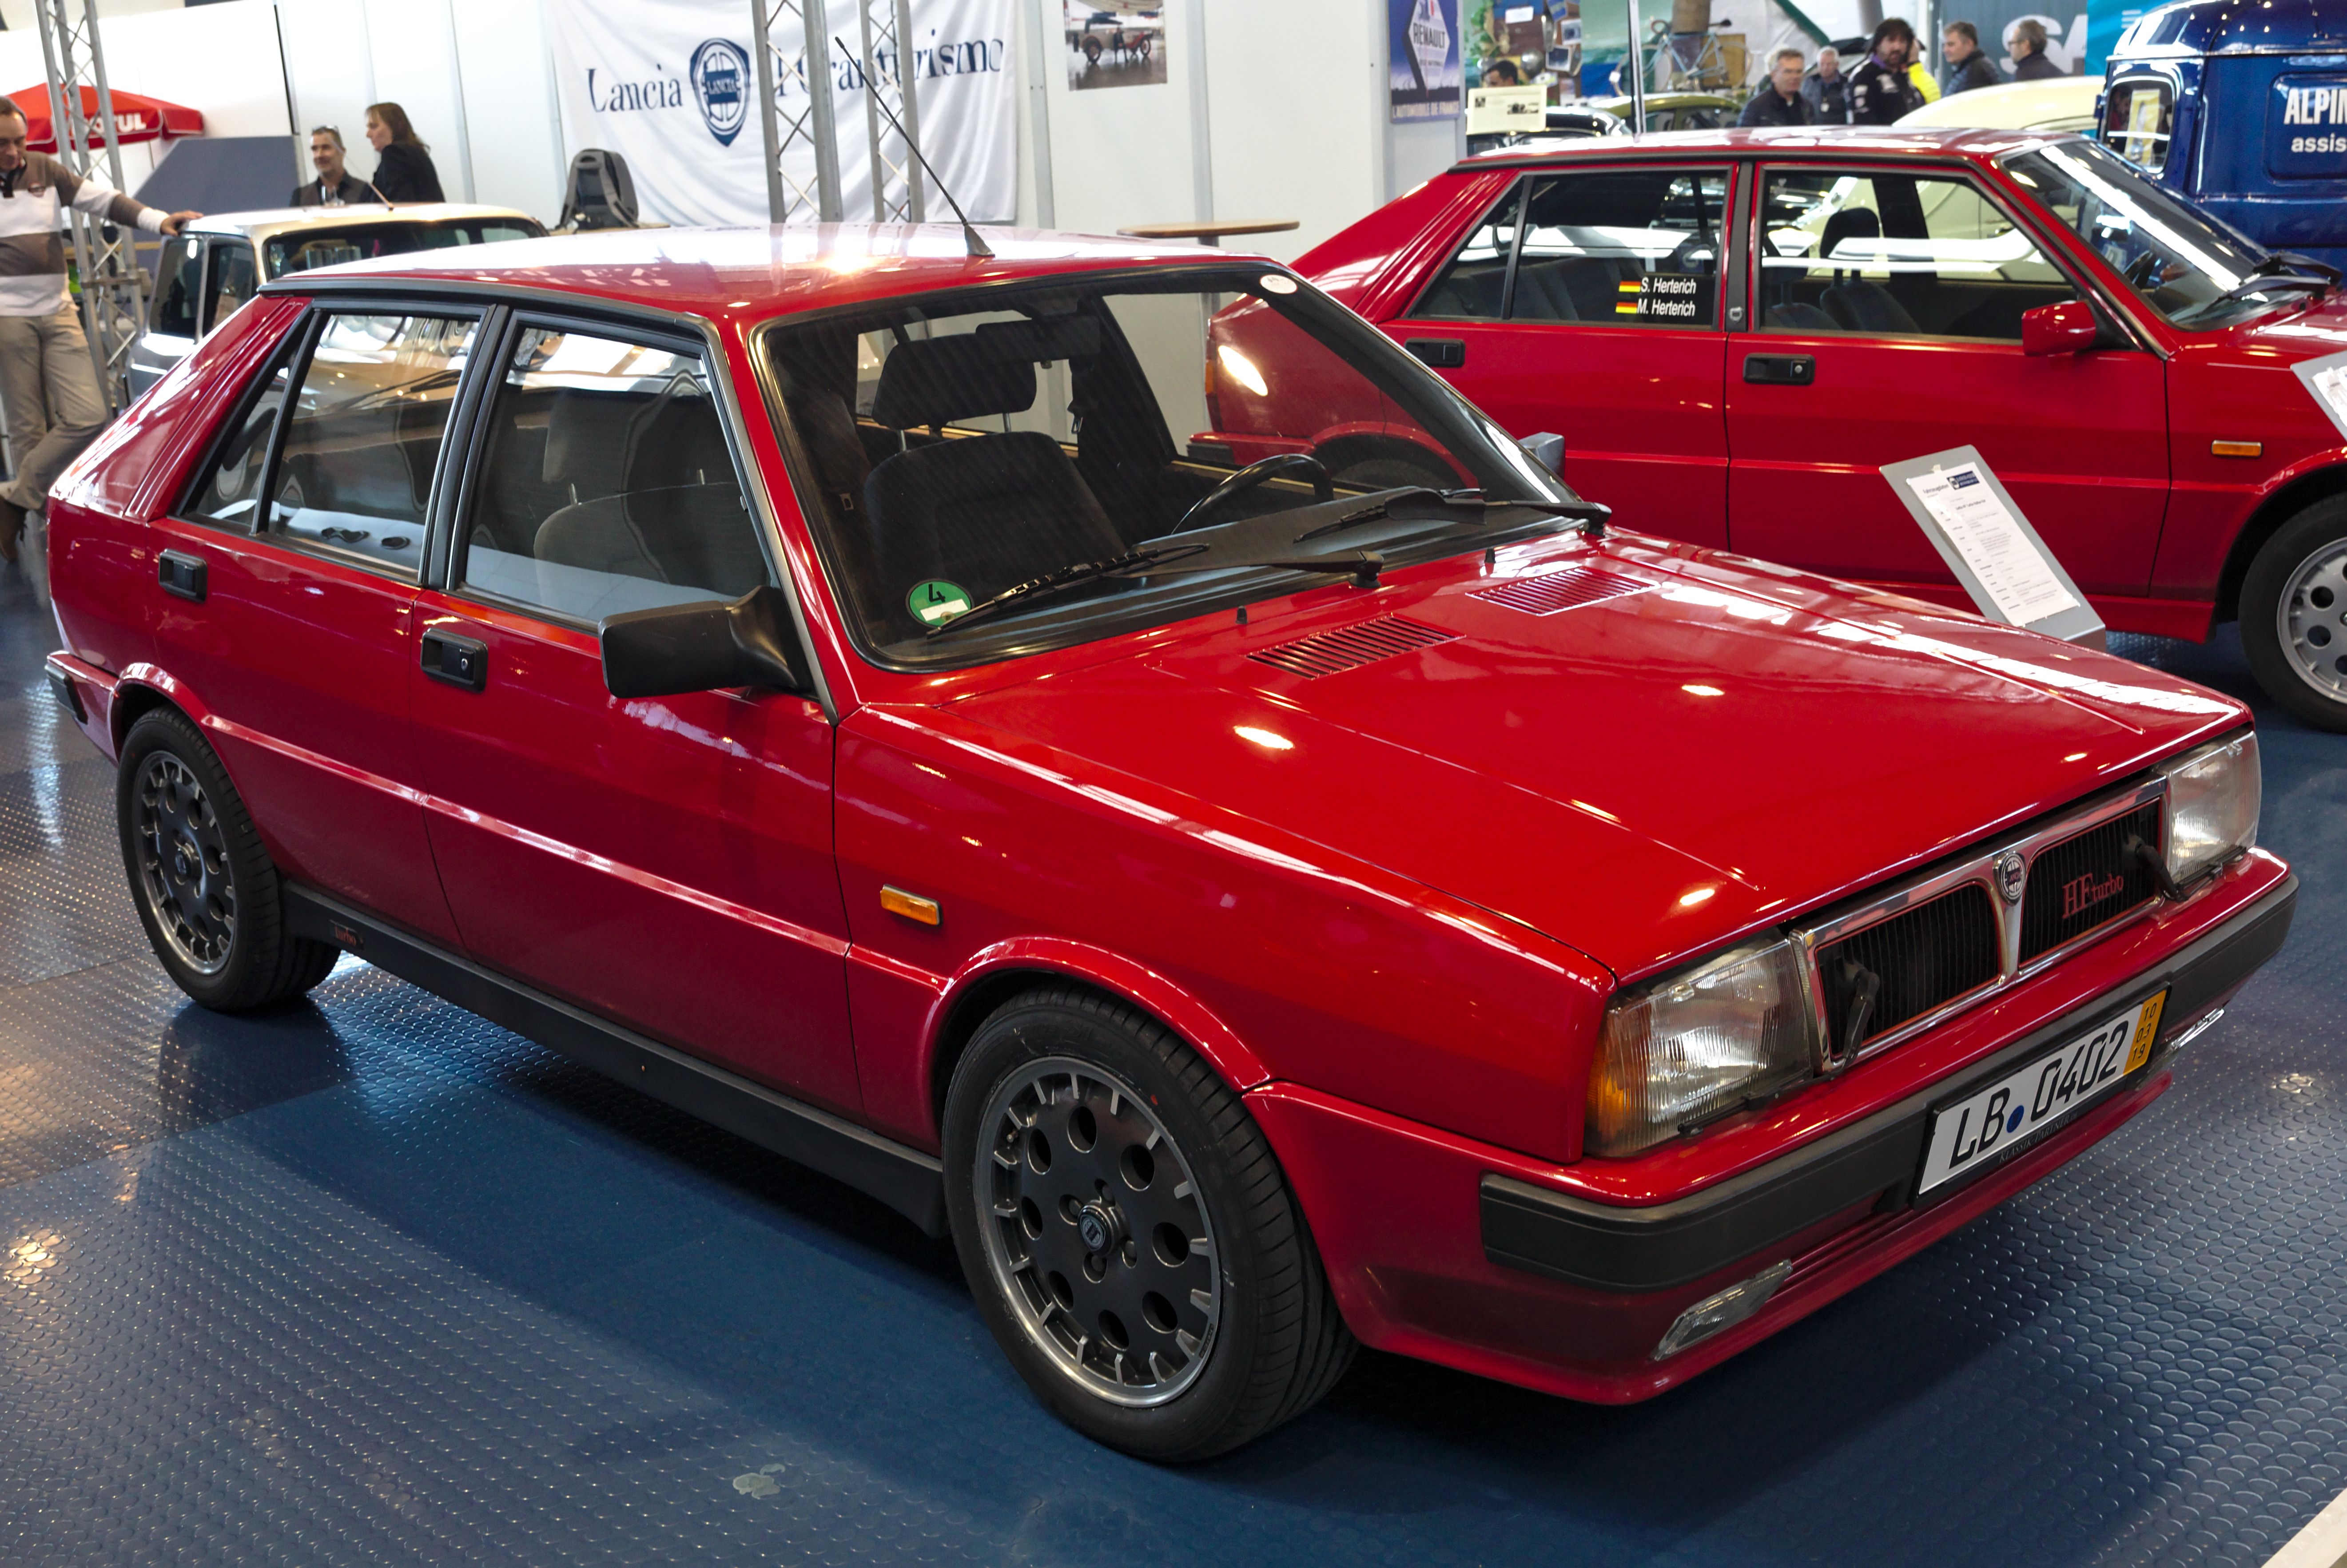 2021 The Volkswagen Golf GTI Wasn't The First Hot Hatchback By A Long Shot